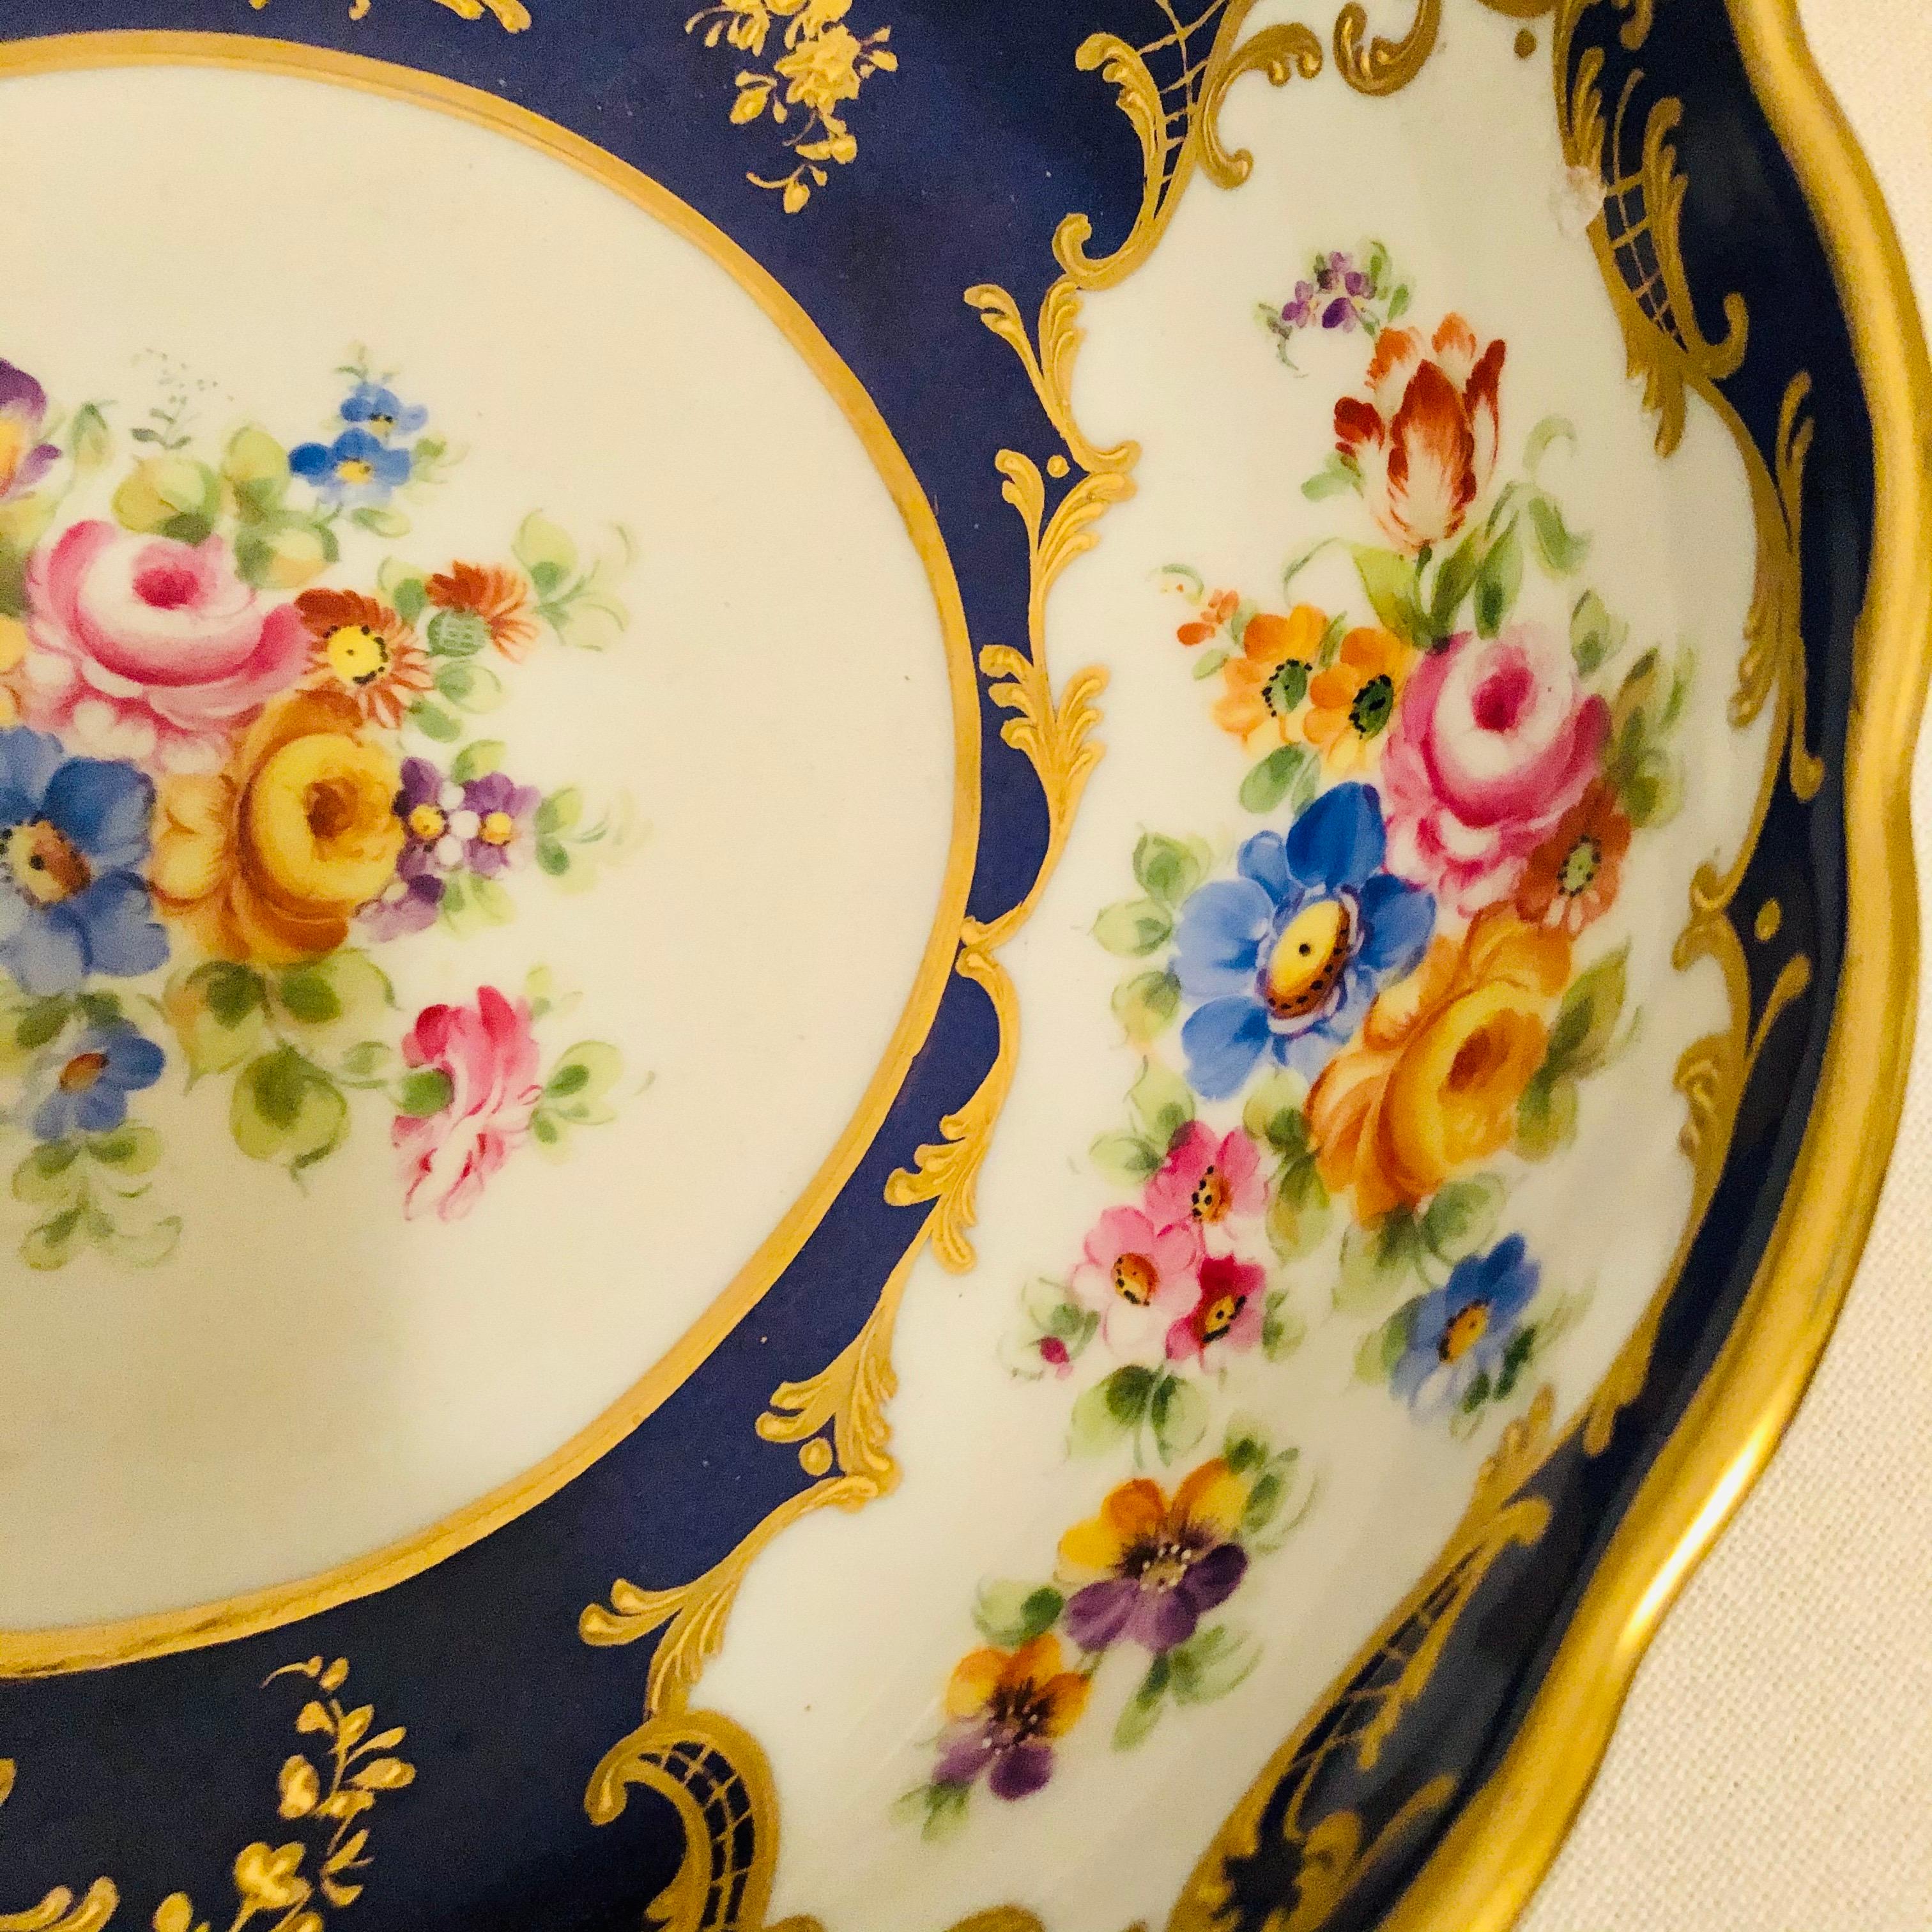 Mid-20th Century Le Tallec Blue Bowl with Painted Central Flower Bouquet and 4 Flower Medallions